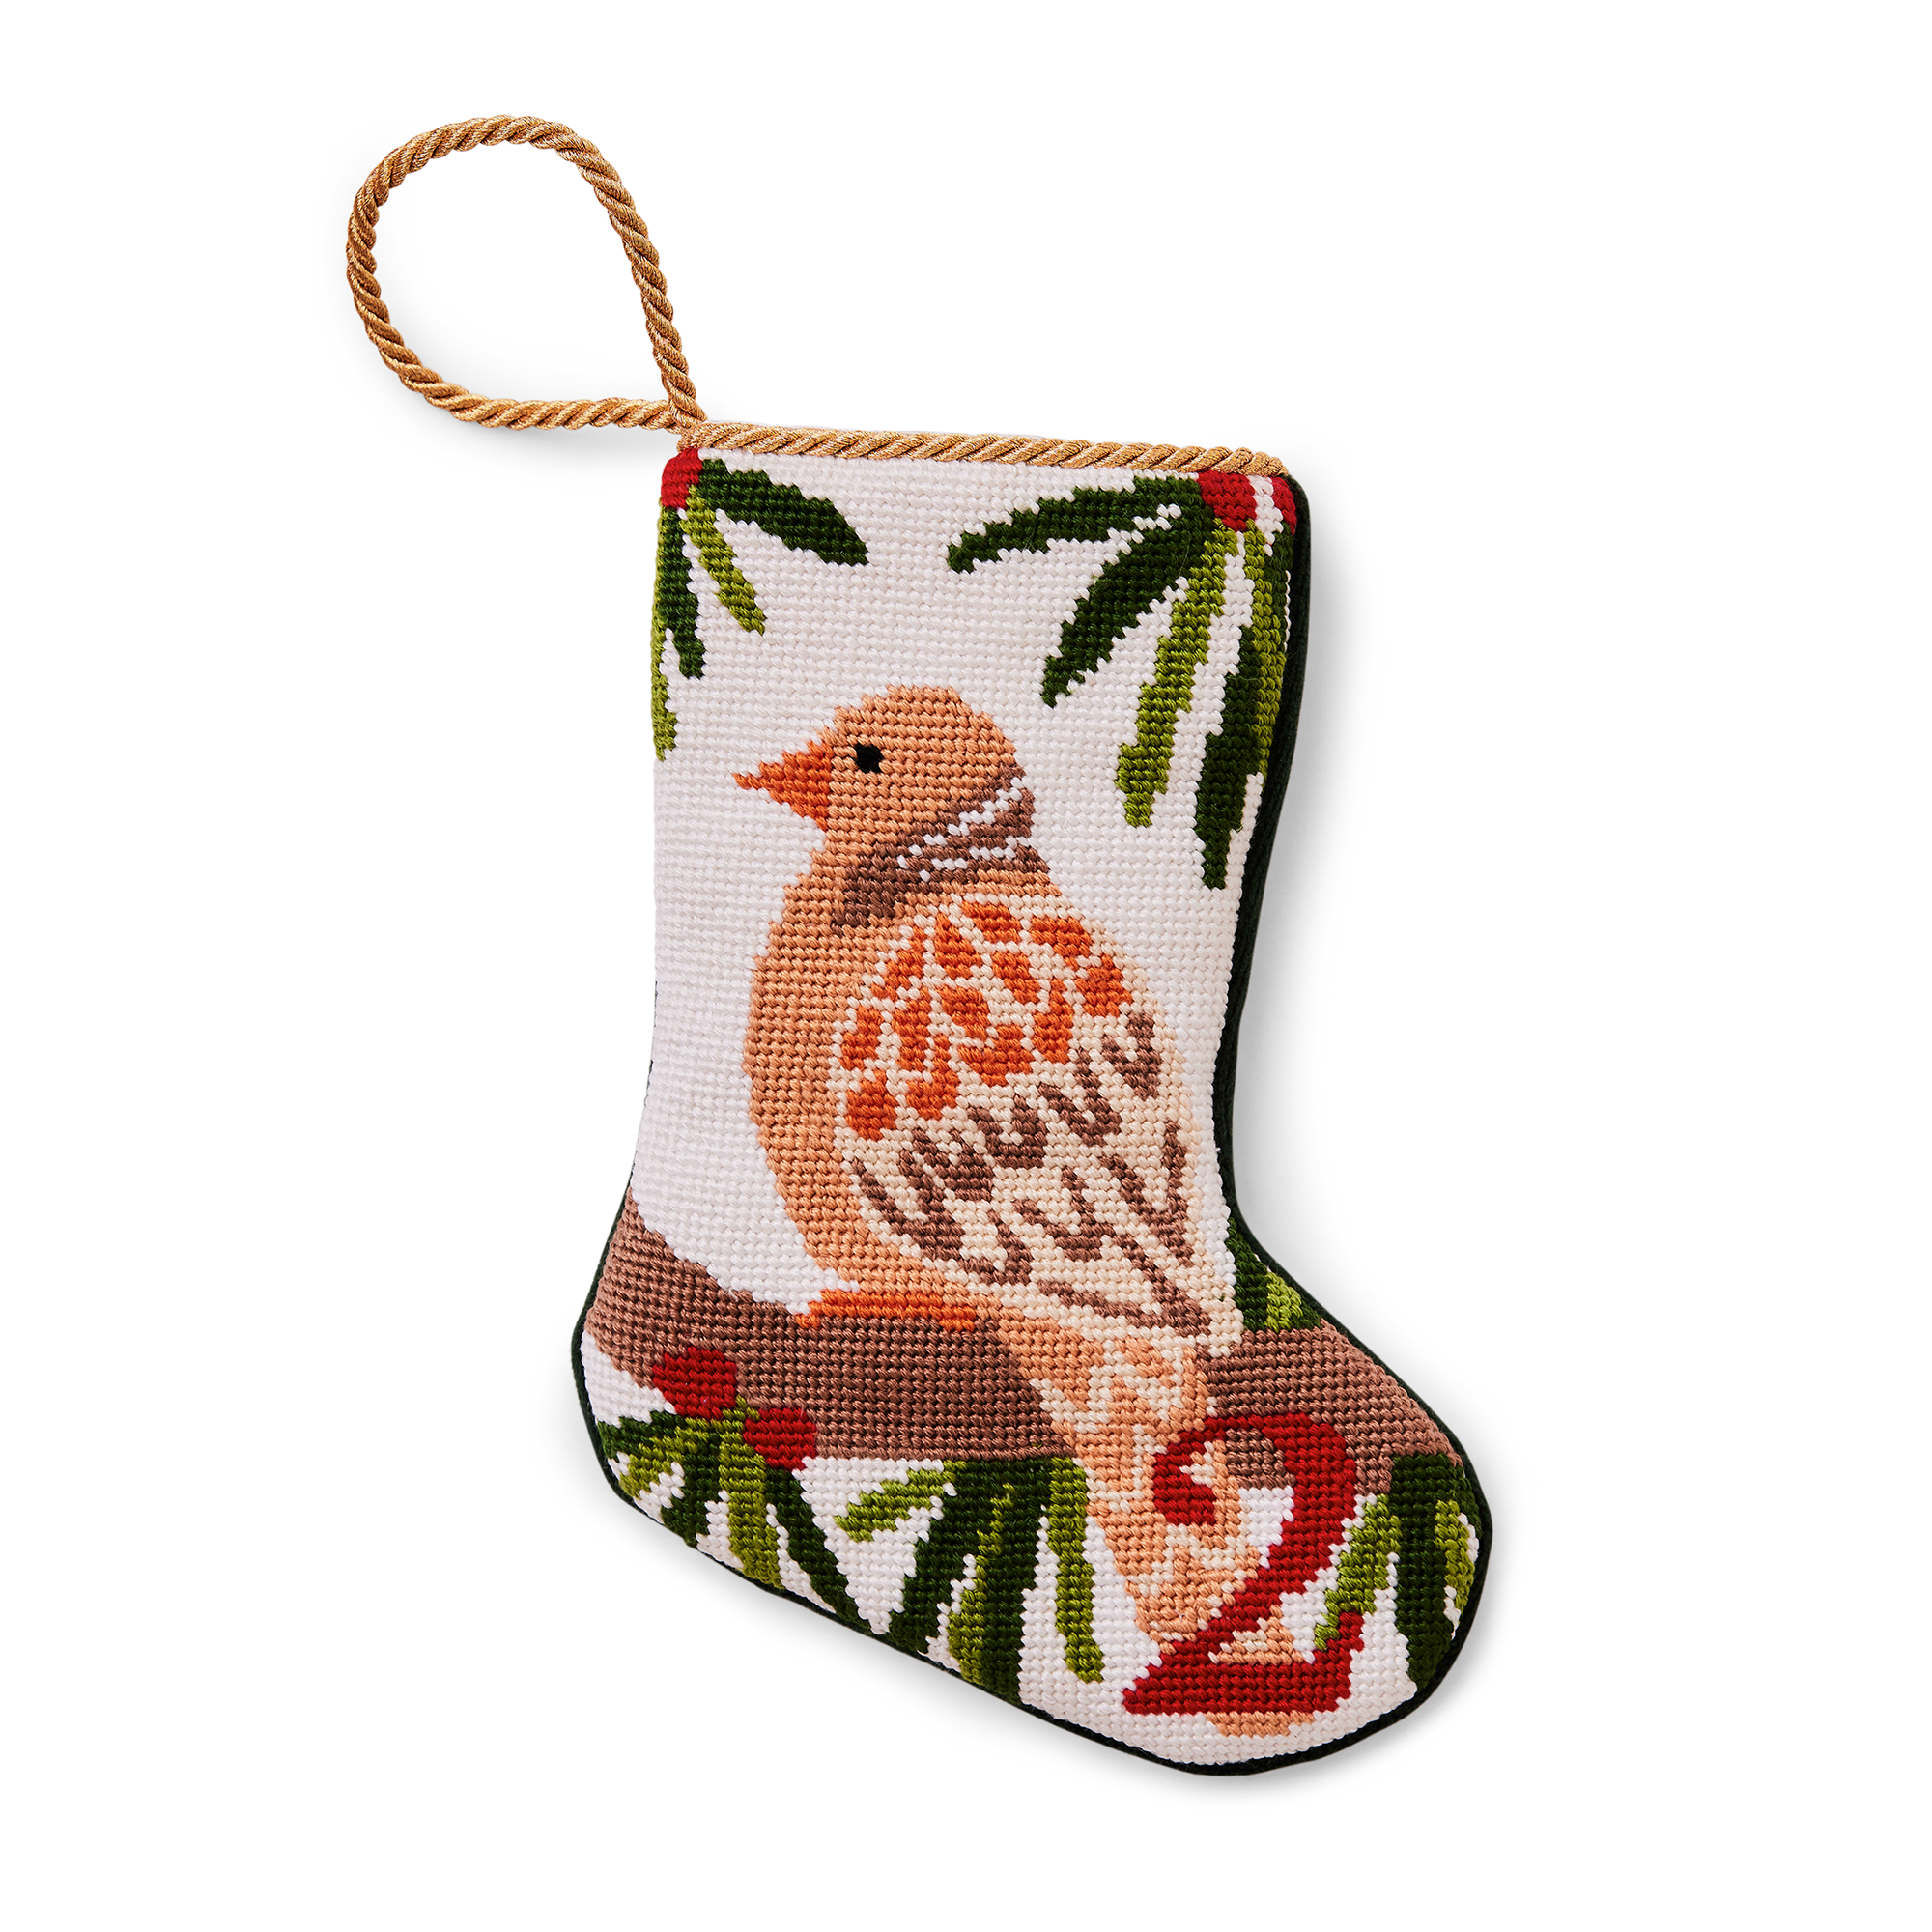 An intricately designed mini needlepoint stocking featuring the '2 Turtle Doves' from the classic Christmas carol. This festive decoration adds a traditional and charming touch to your holiday decor. Perfect as tree ornaments, place settings, or for holding special gifts.